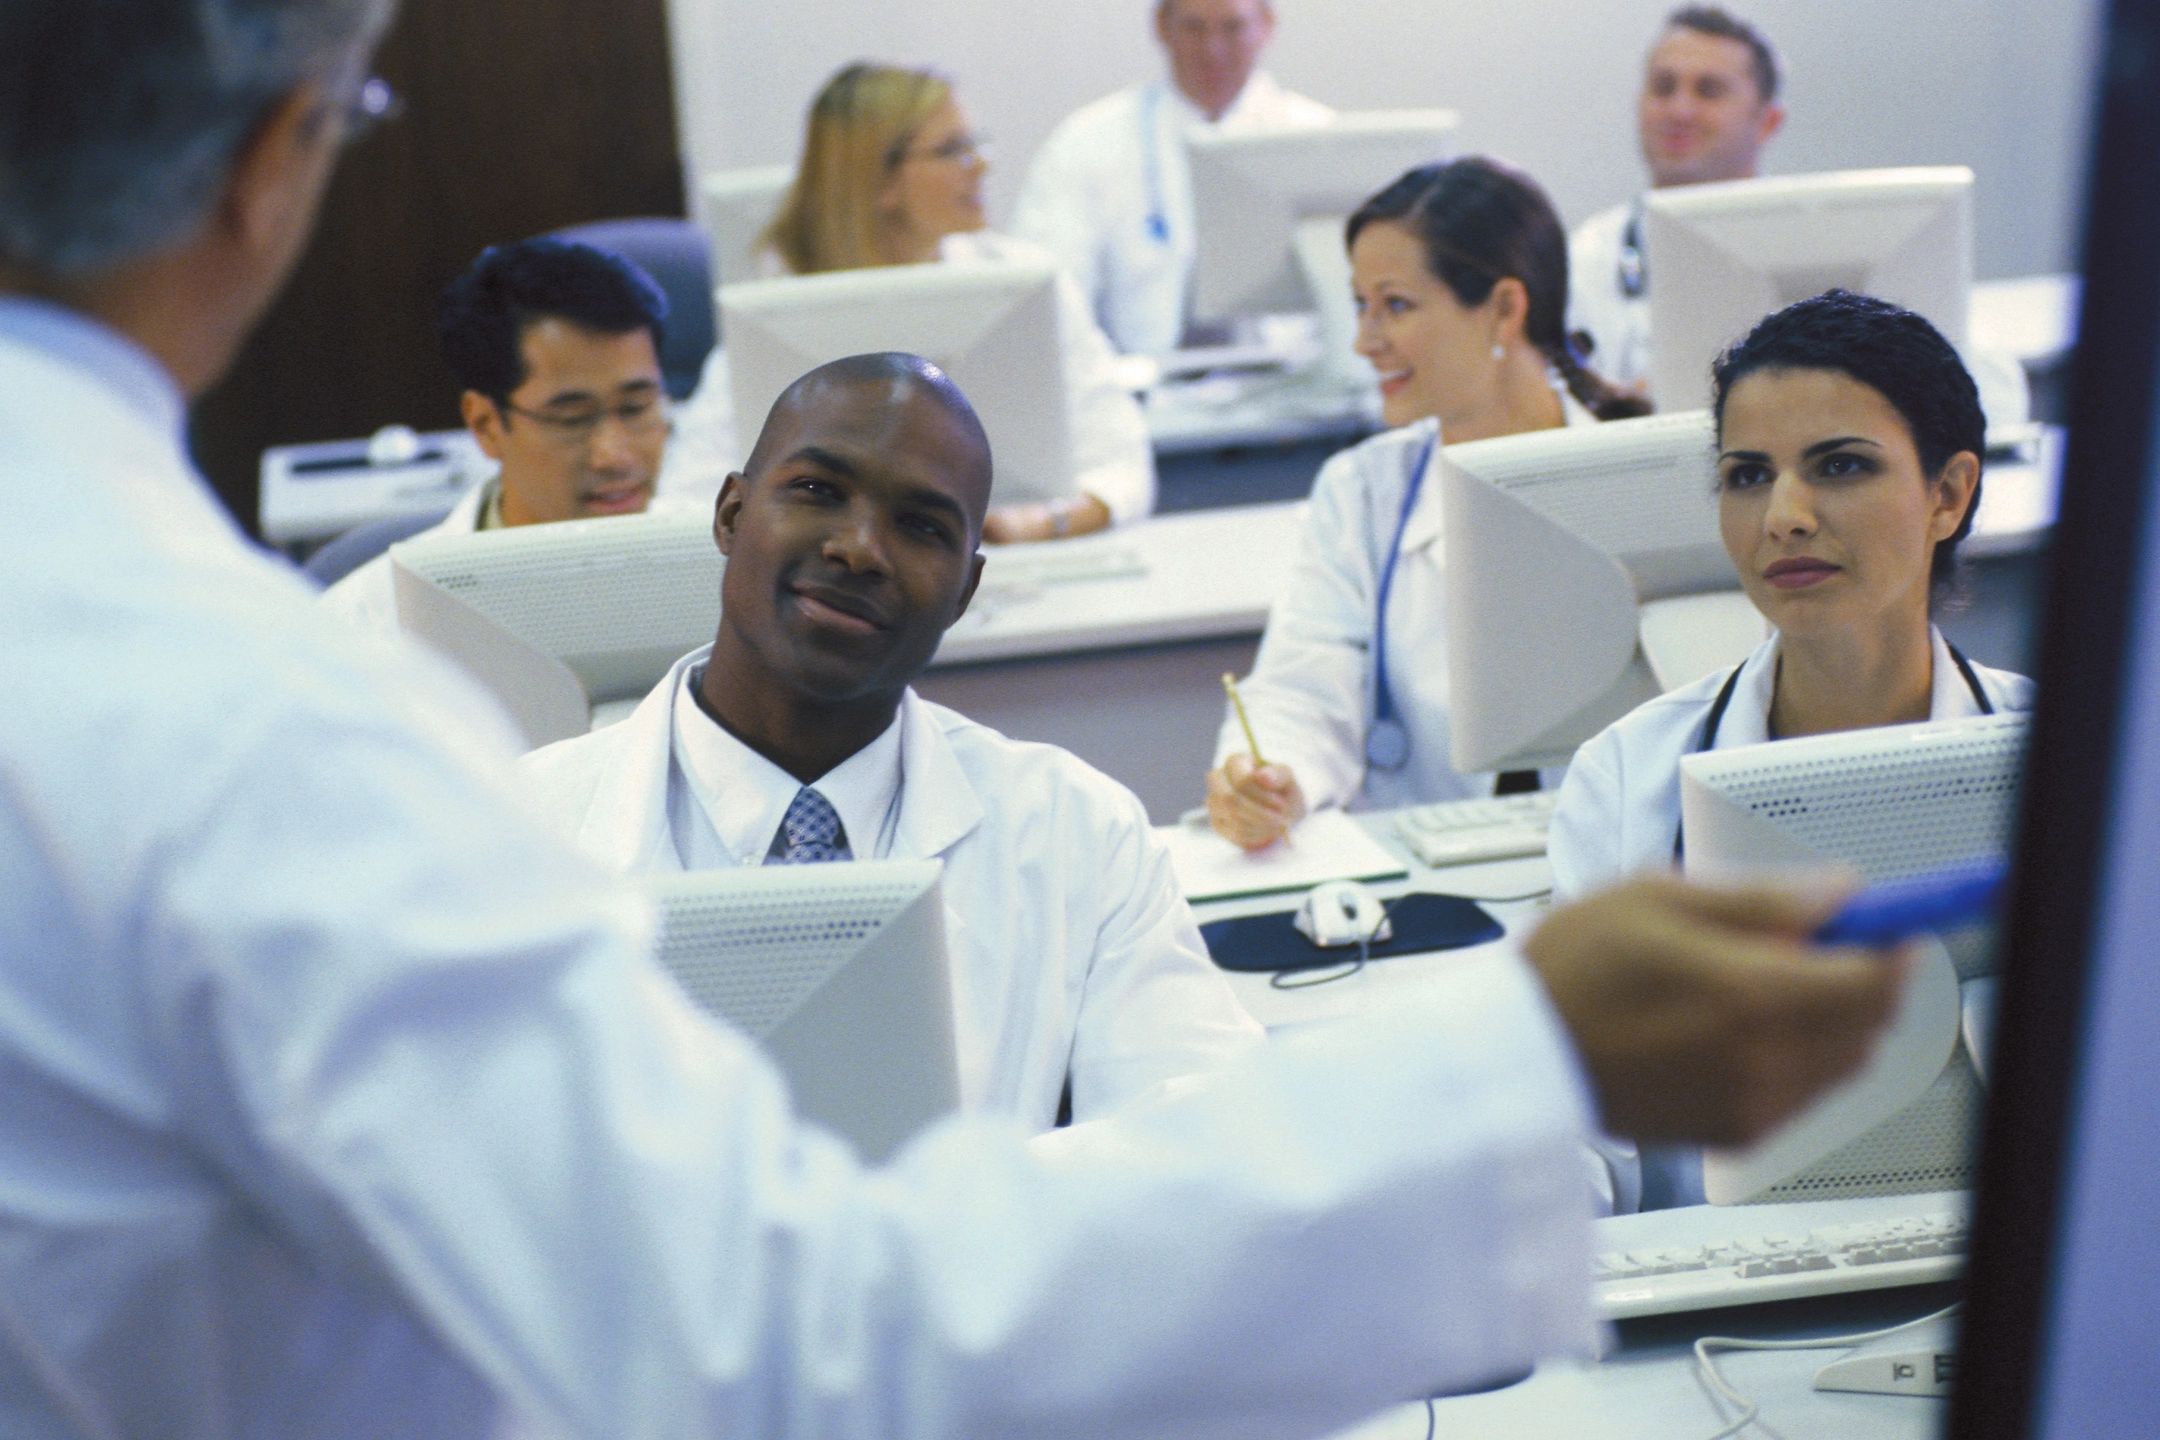 A group of people wearing white coats sit in rows behind laptops with a lecturer pointing at a screen.